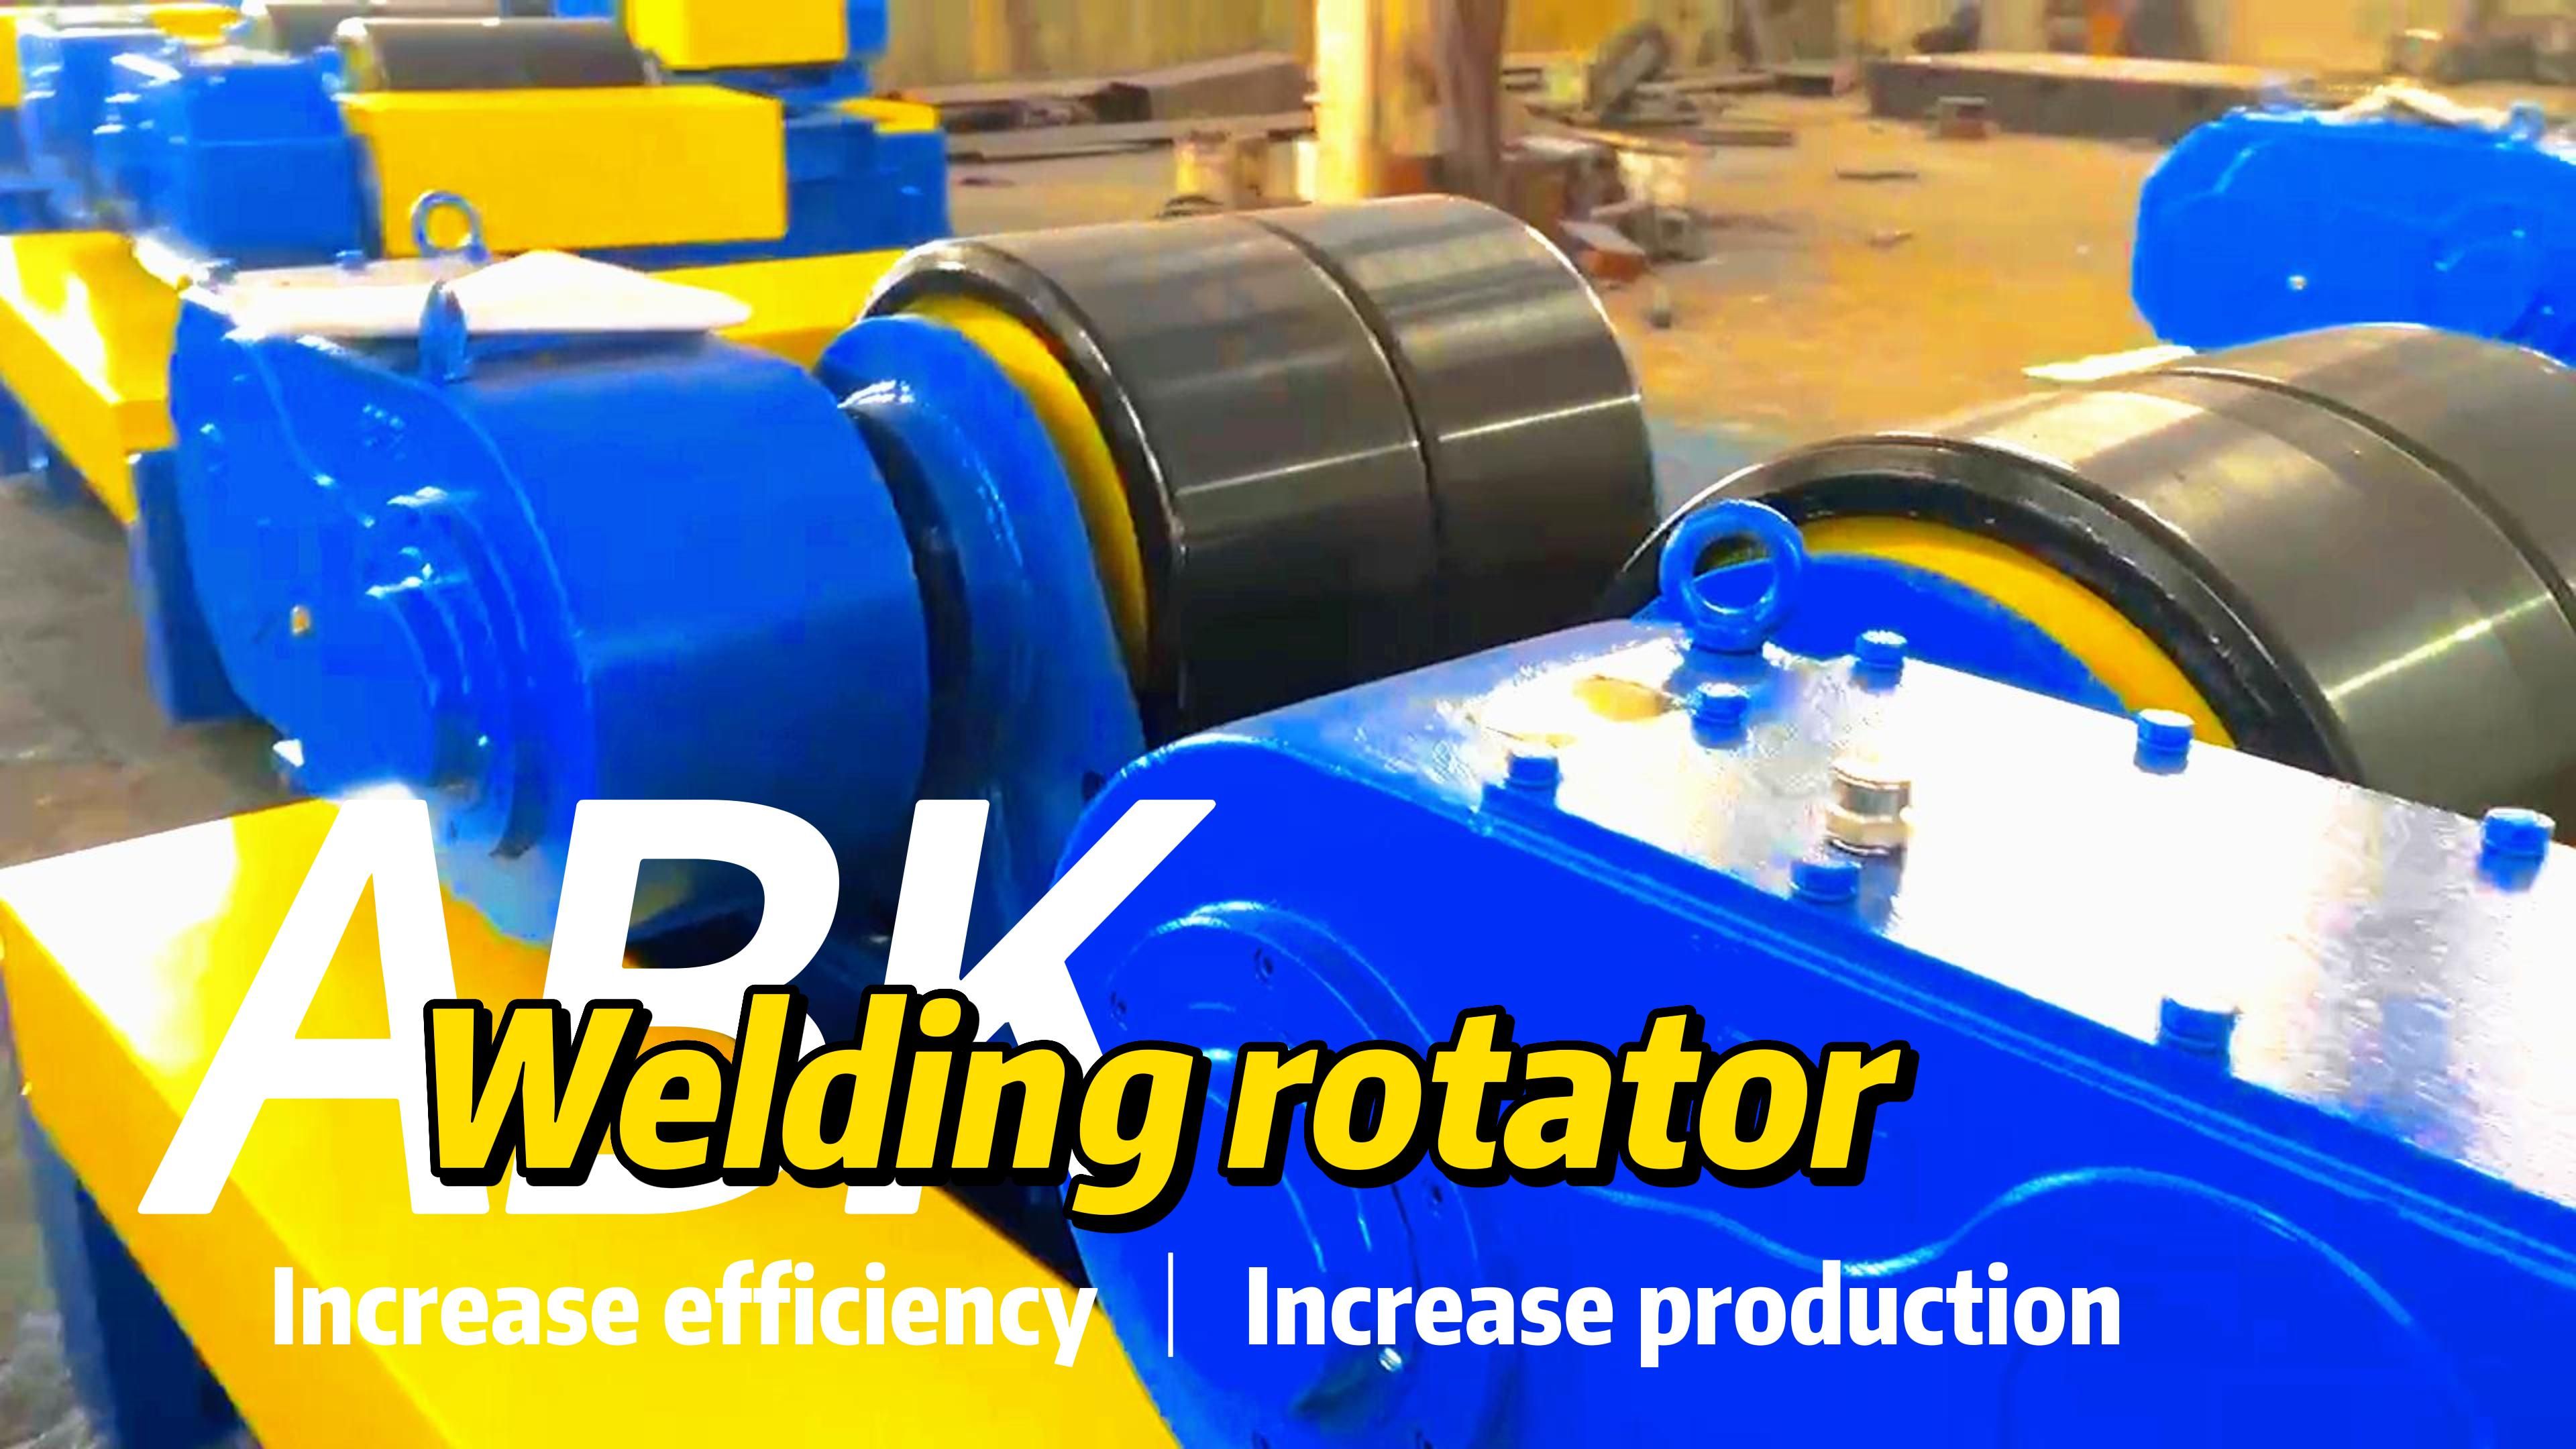 A sharp weapon to improve welding efficiency and quality-welding rotator